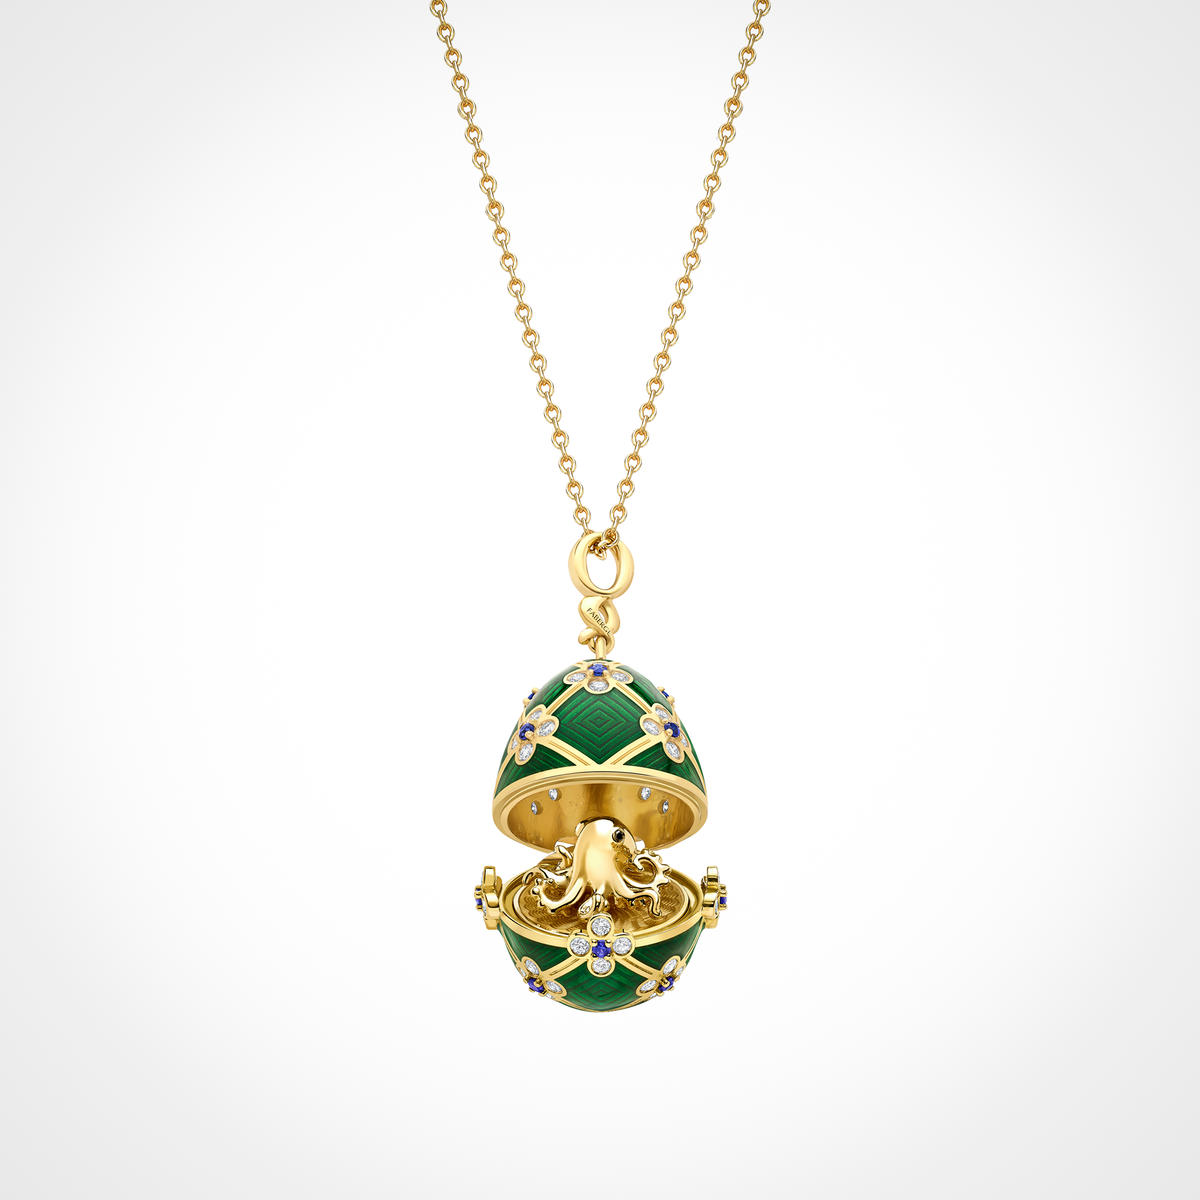 Fabergé x 007 Octopussy Egg Surprise Locket - Special Edition